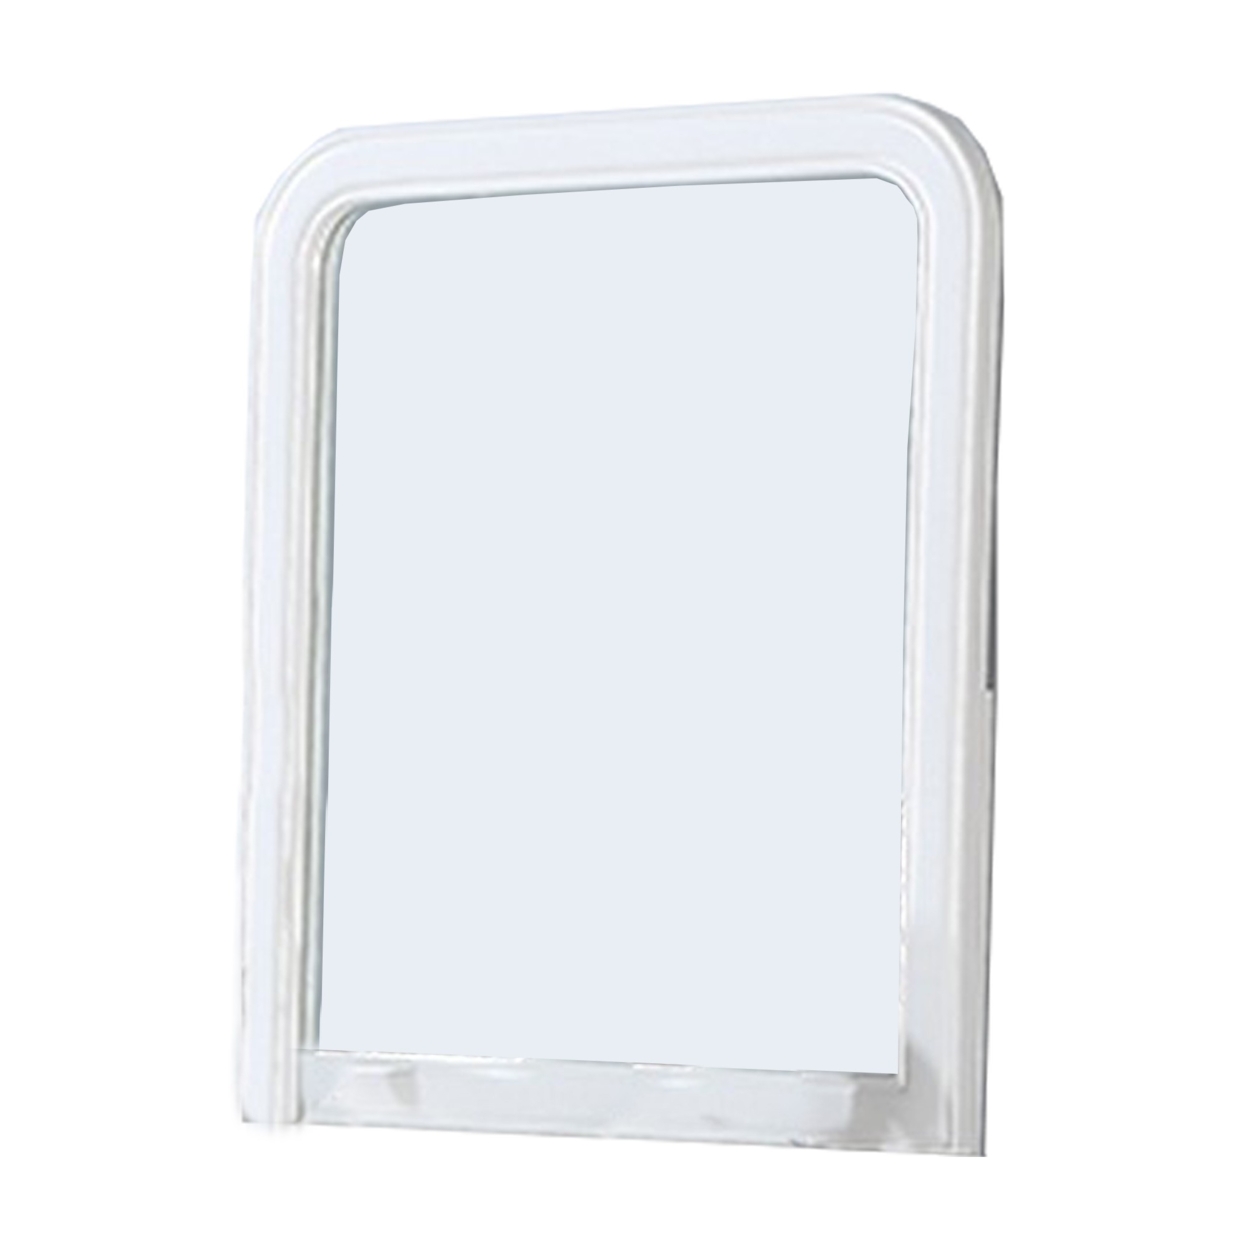 37 Inches Wooden Mirror With Curved Edges, White- Saltoro Sherpi